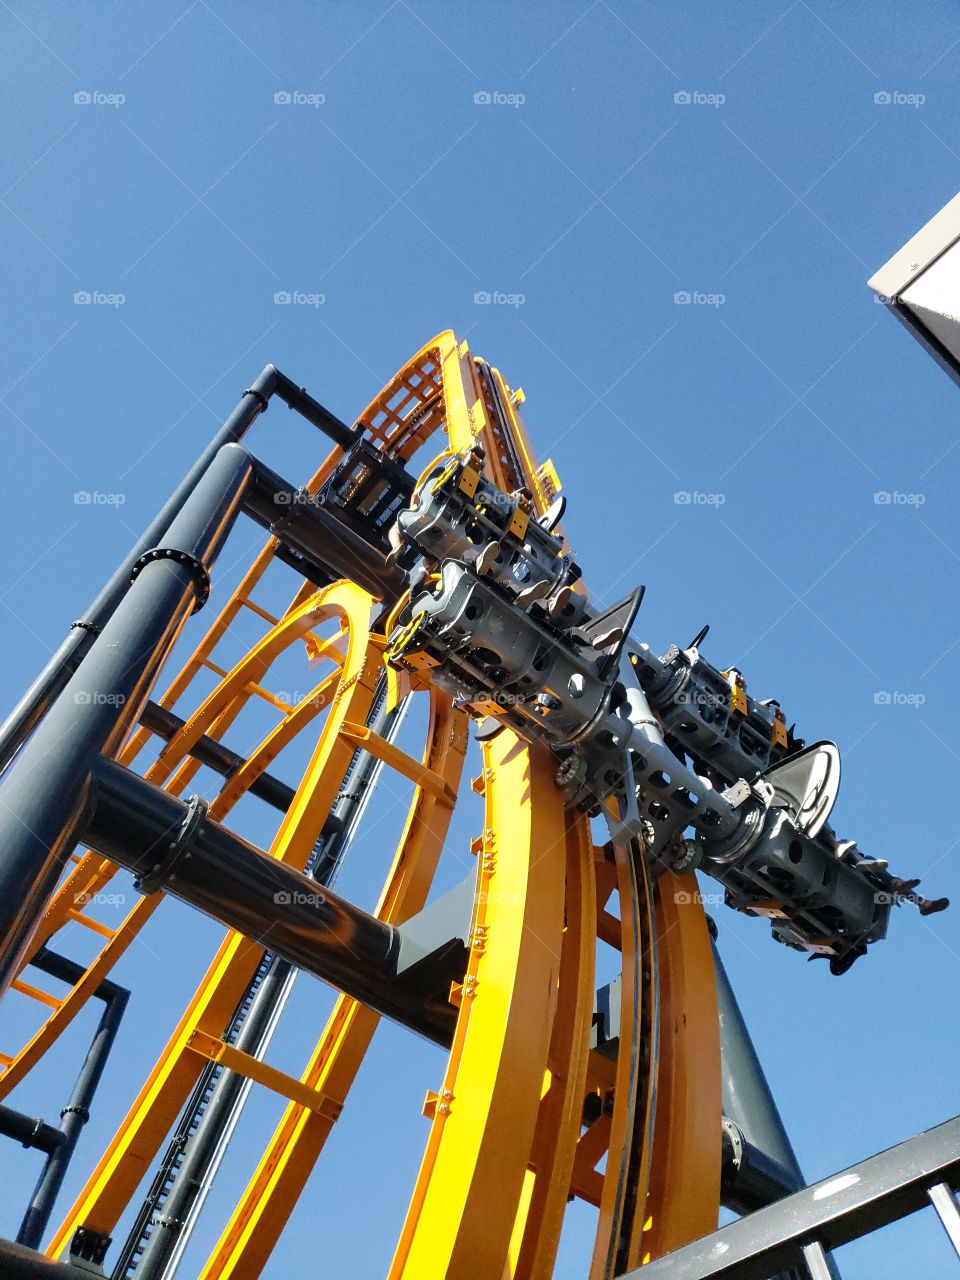 The new Batman: The Ride at Six Flags Discovery Kingdom in Vallejo, CA